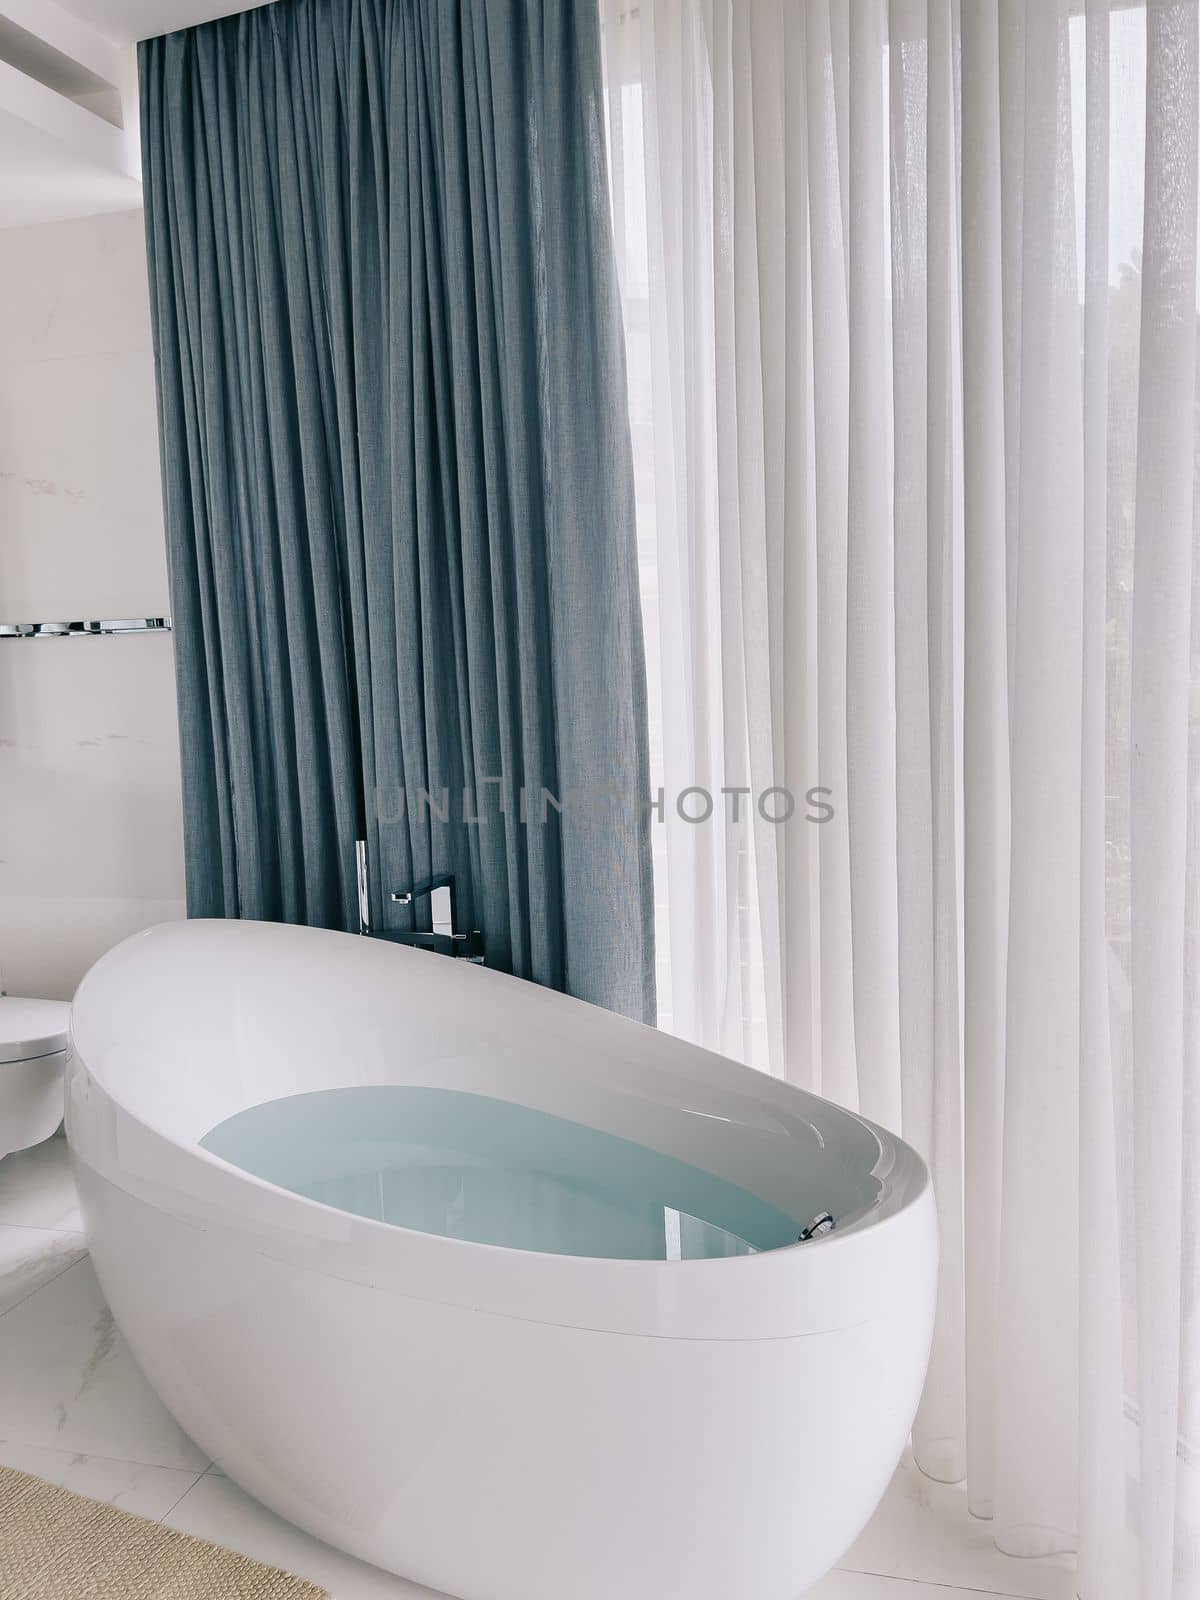 Oval bathtub with chrome taps stands near a panoramic window with curtains. High quality photo